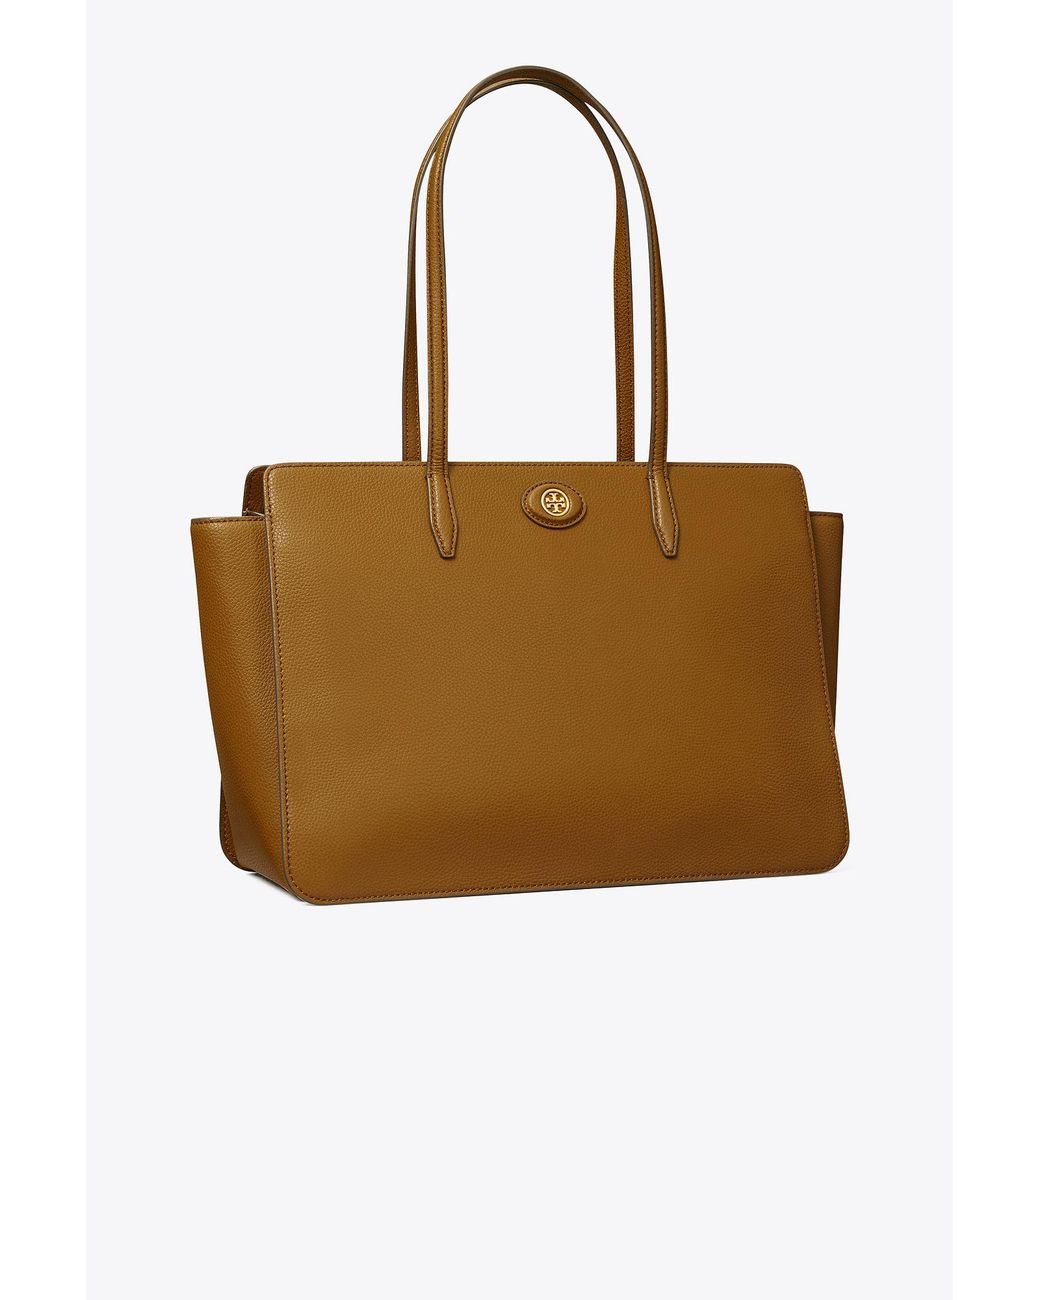 Tory Burch Robinson Pebbled Tote in Brown